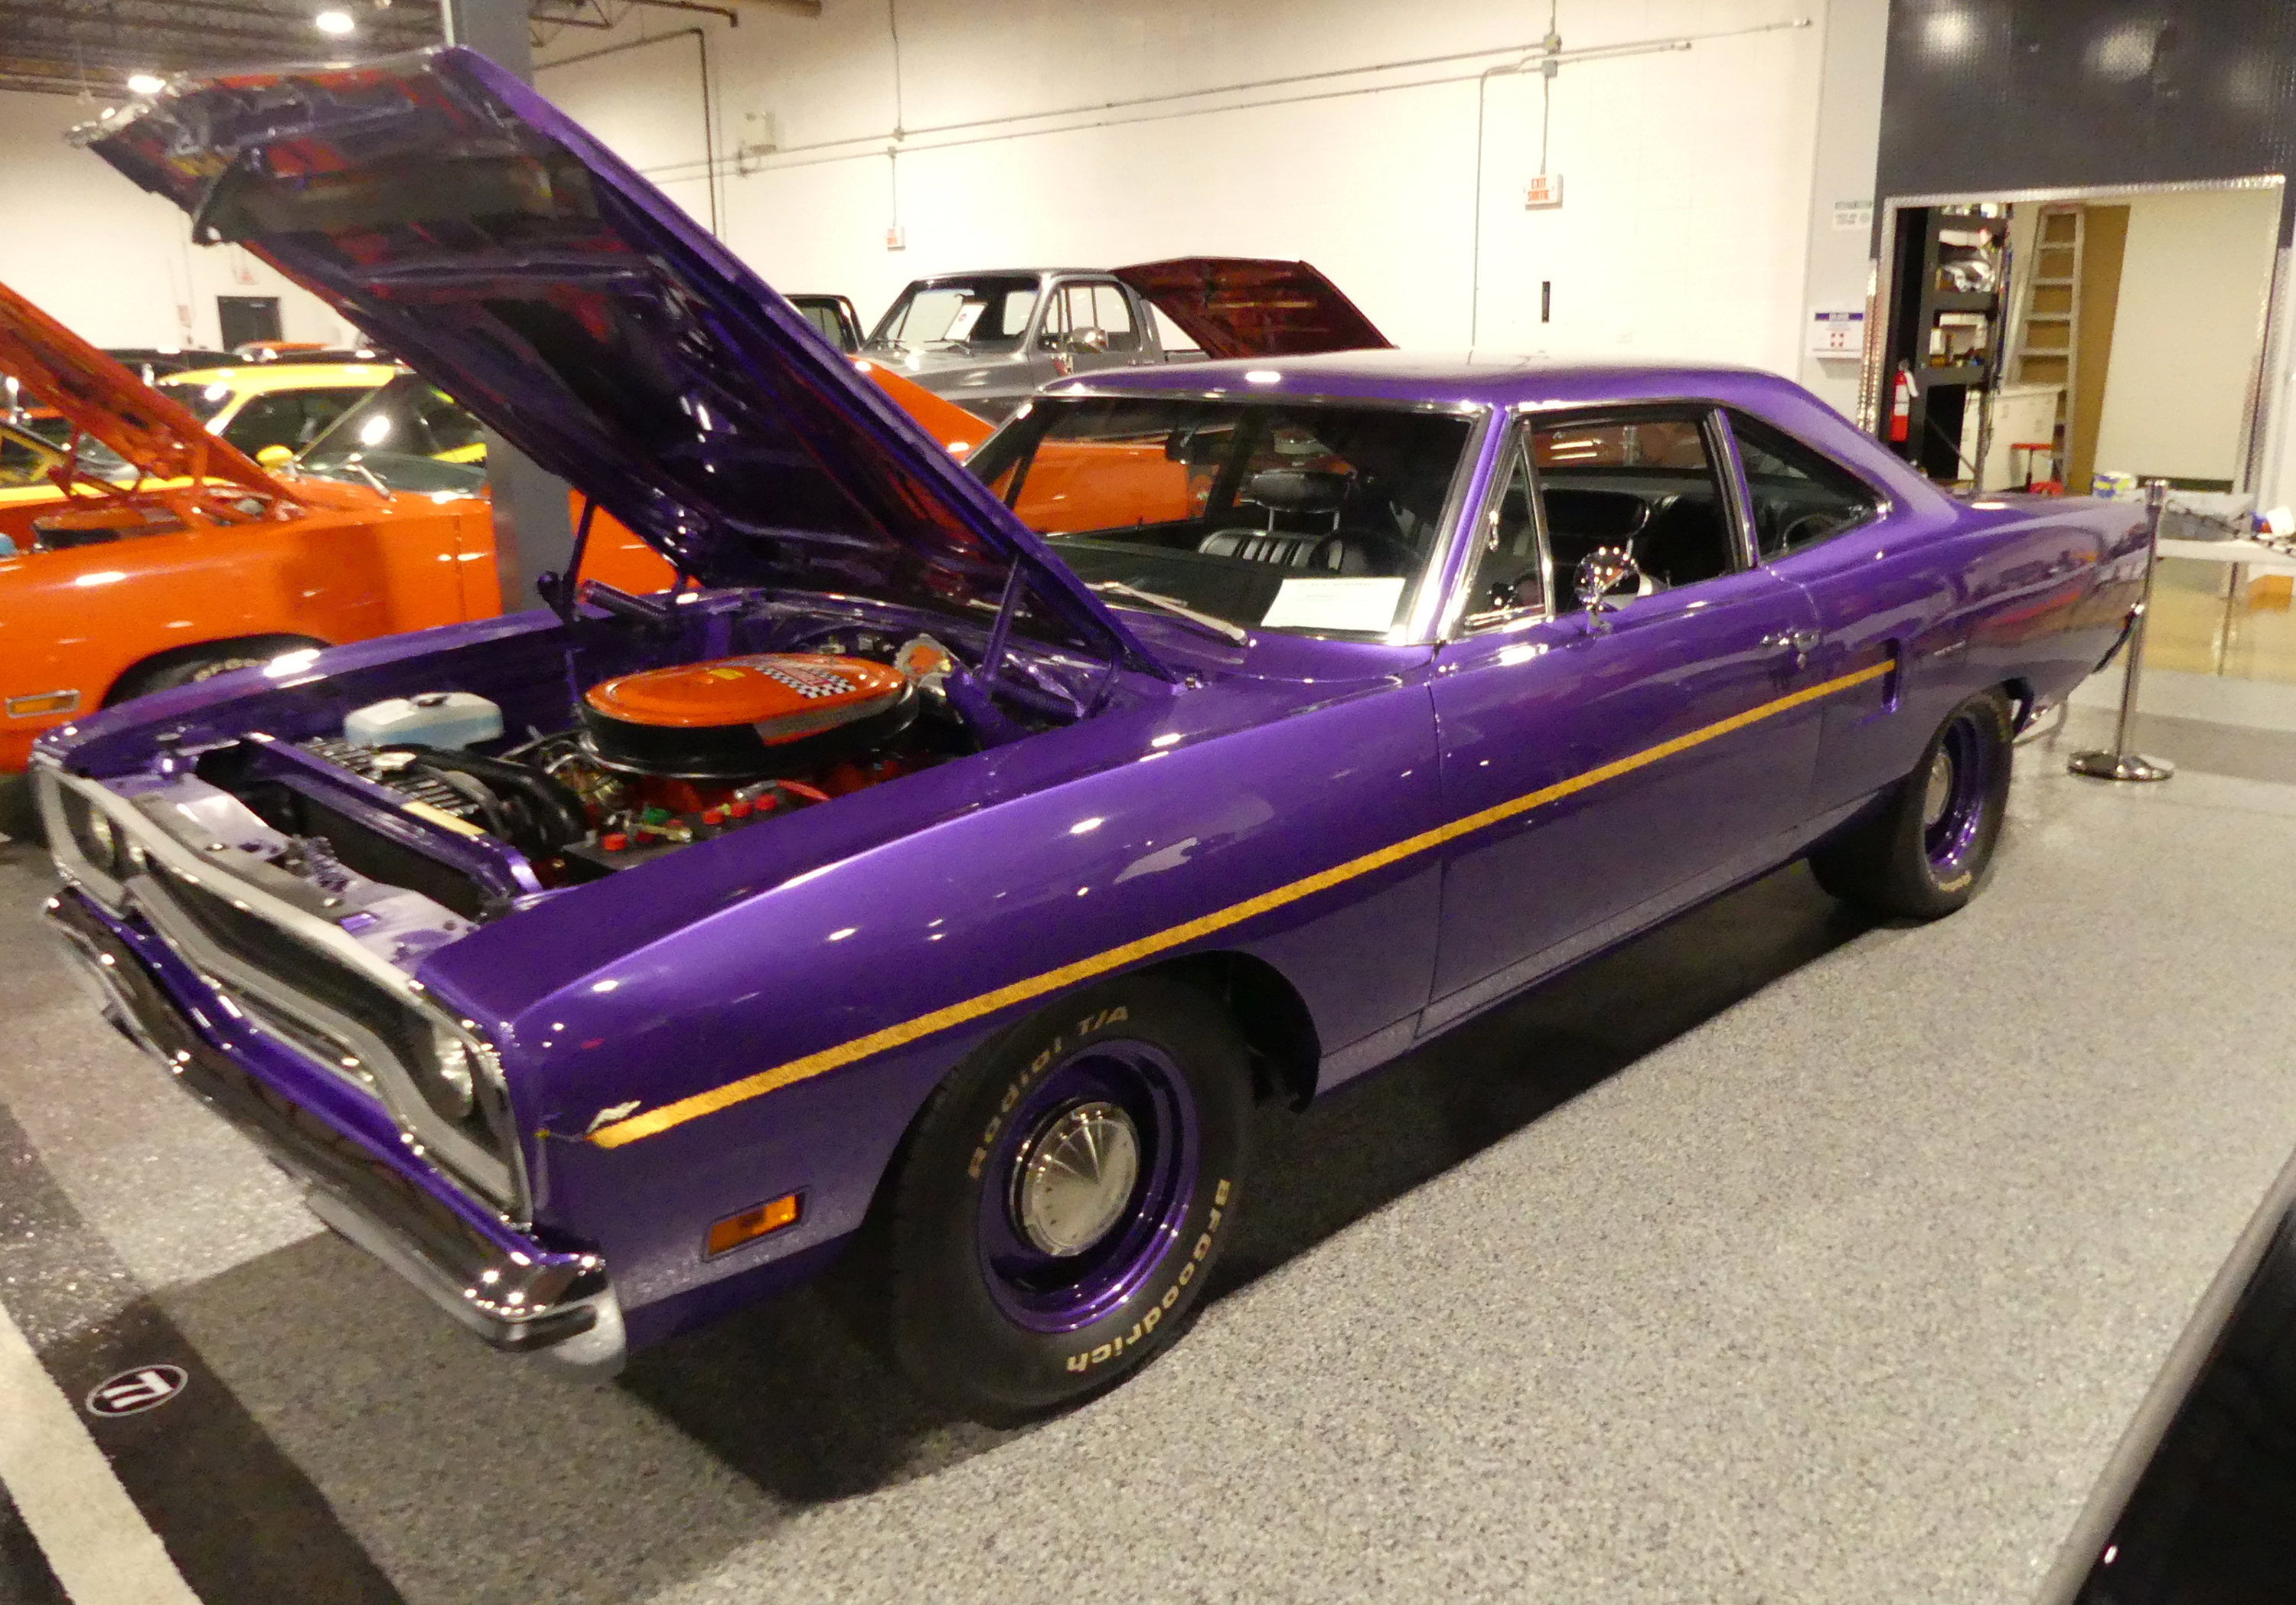 1970 Plymouth Road Runner:
                                            Colour: In-Violet Metallic
                                            Built to original factory specifications with small upgrades.
                                            A833 – Hemi Four Speed